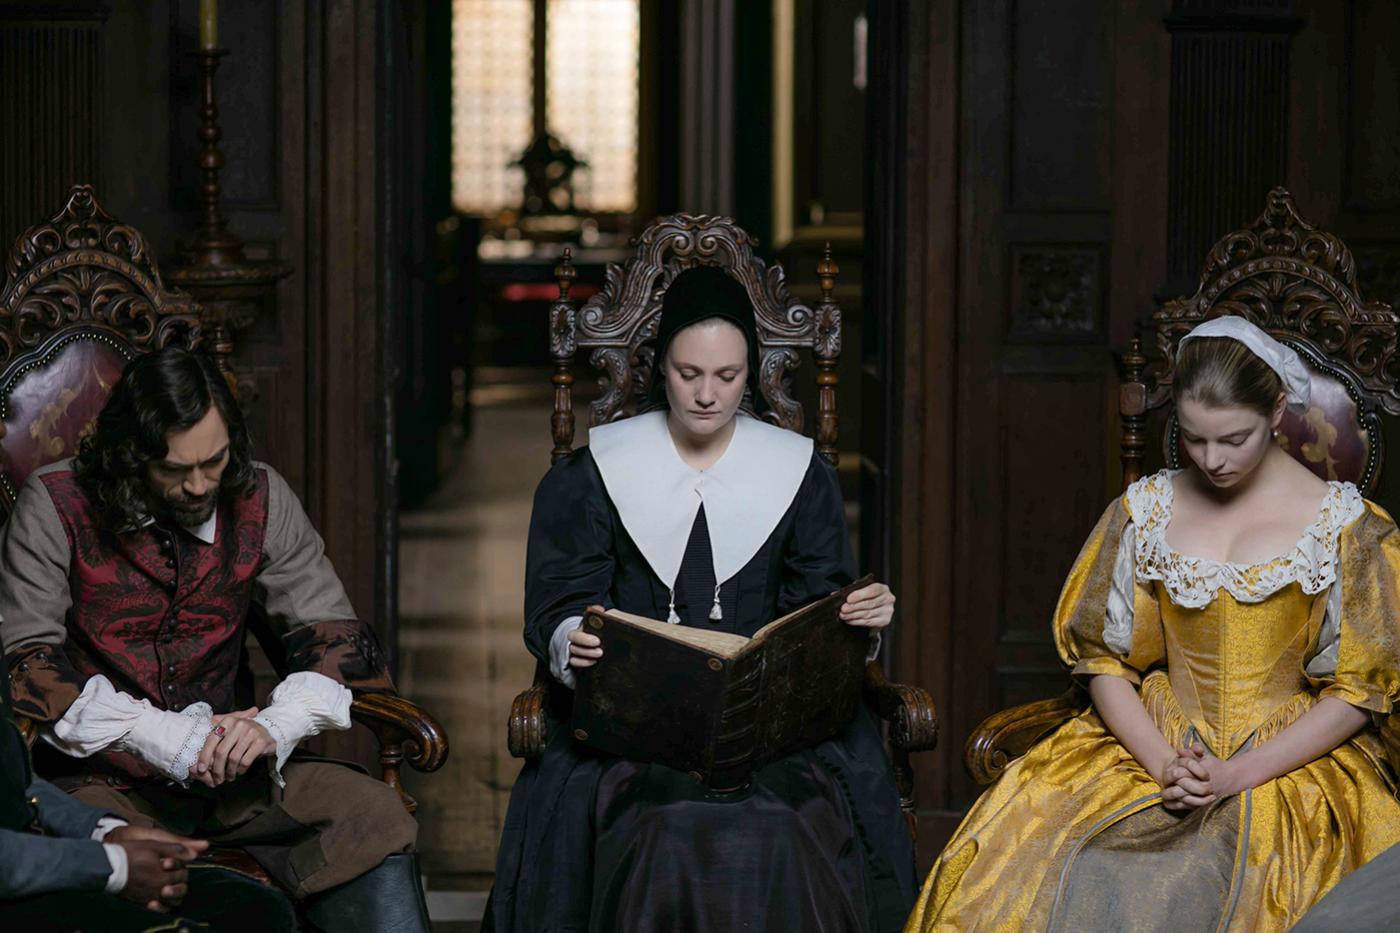 Alex Hassell as Johannes Brandt, Romola Garai as Marin Brandt and Anya Taylor-Joy as Petronella Brandt in The Miniaturist. Photo: The Forge/Laurence Cendrowicz for BBC and MASTERPIECE